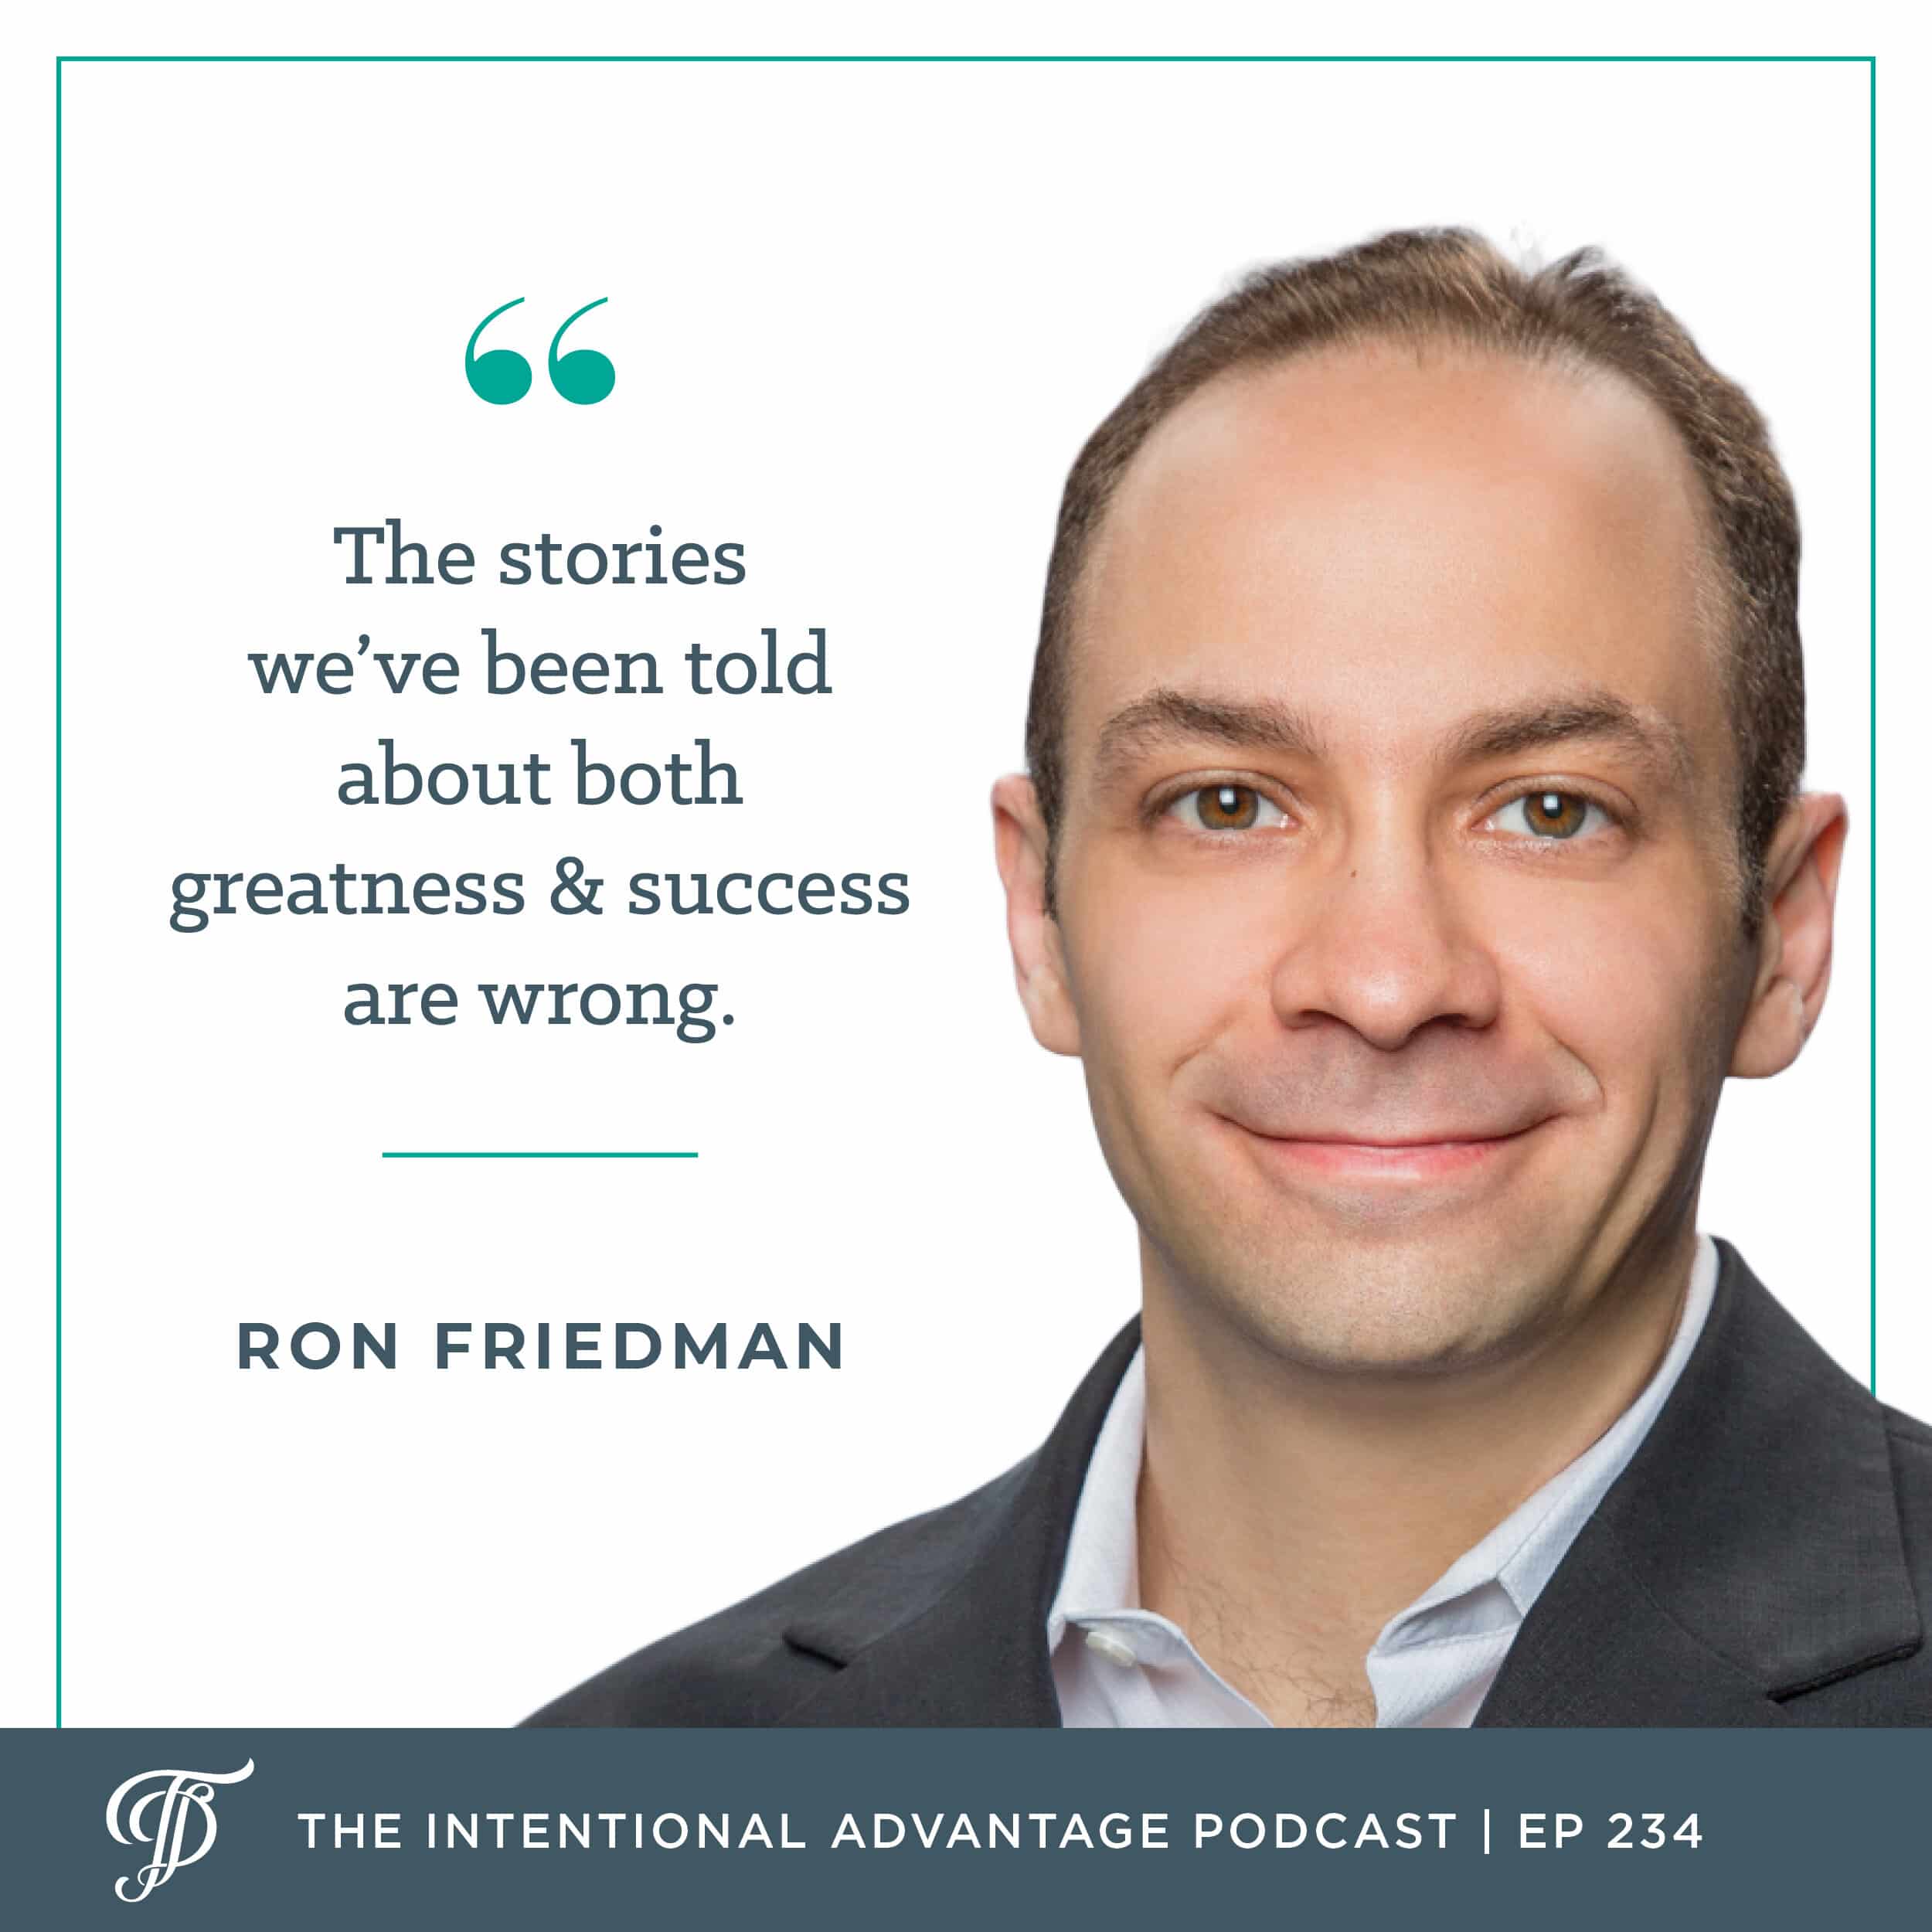 Ron Friedman podcast interview on The Intentional Advantage